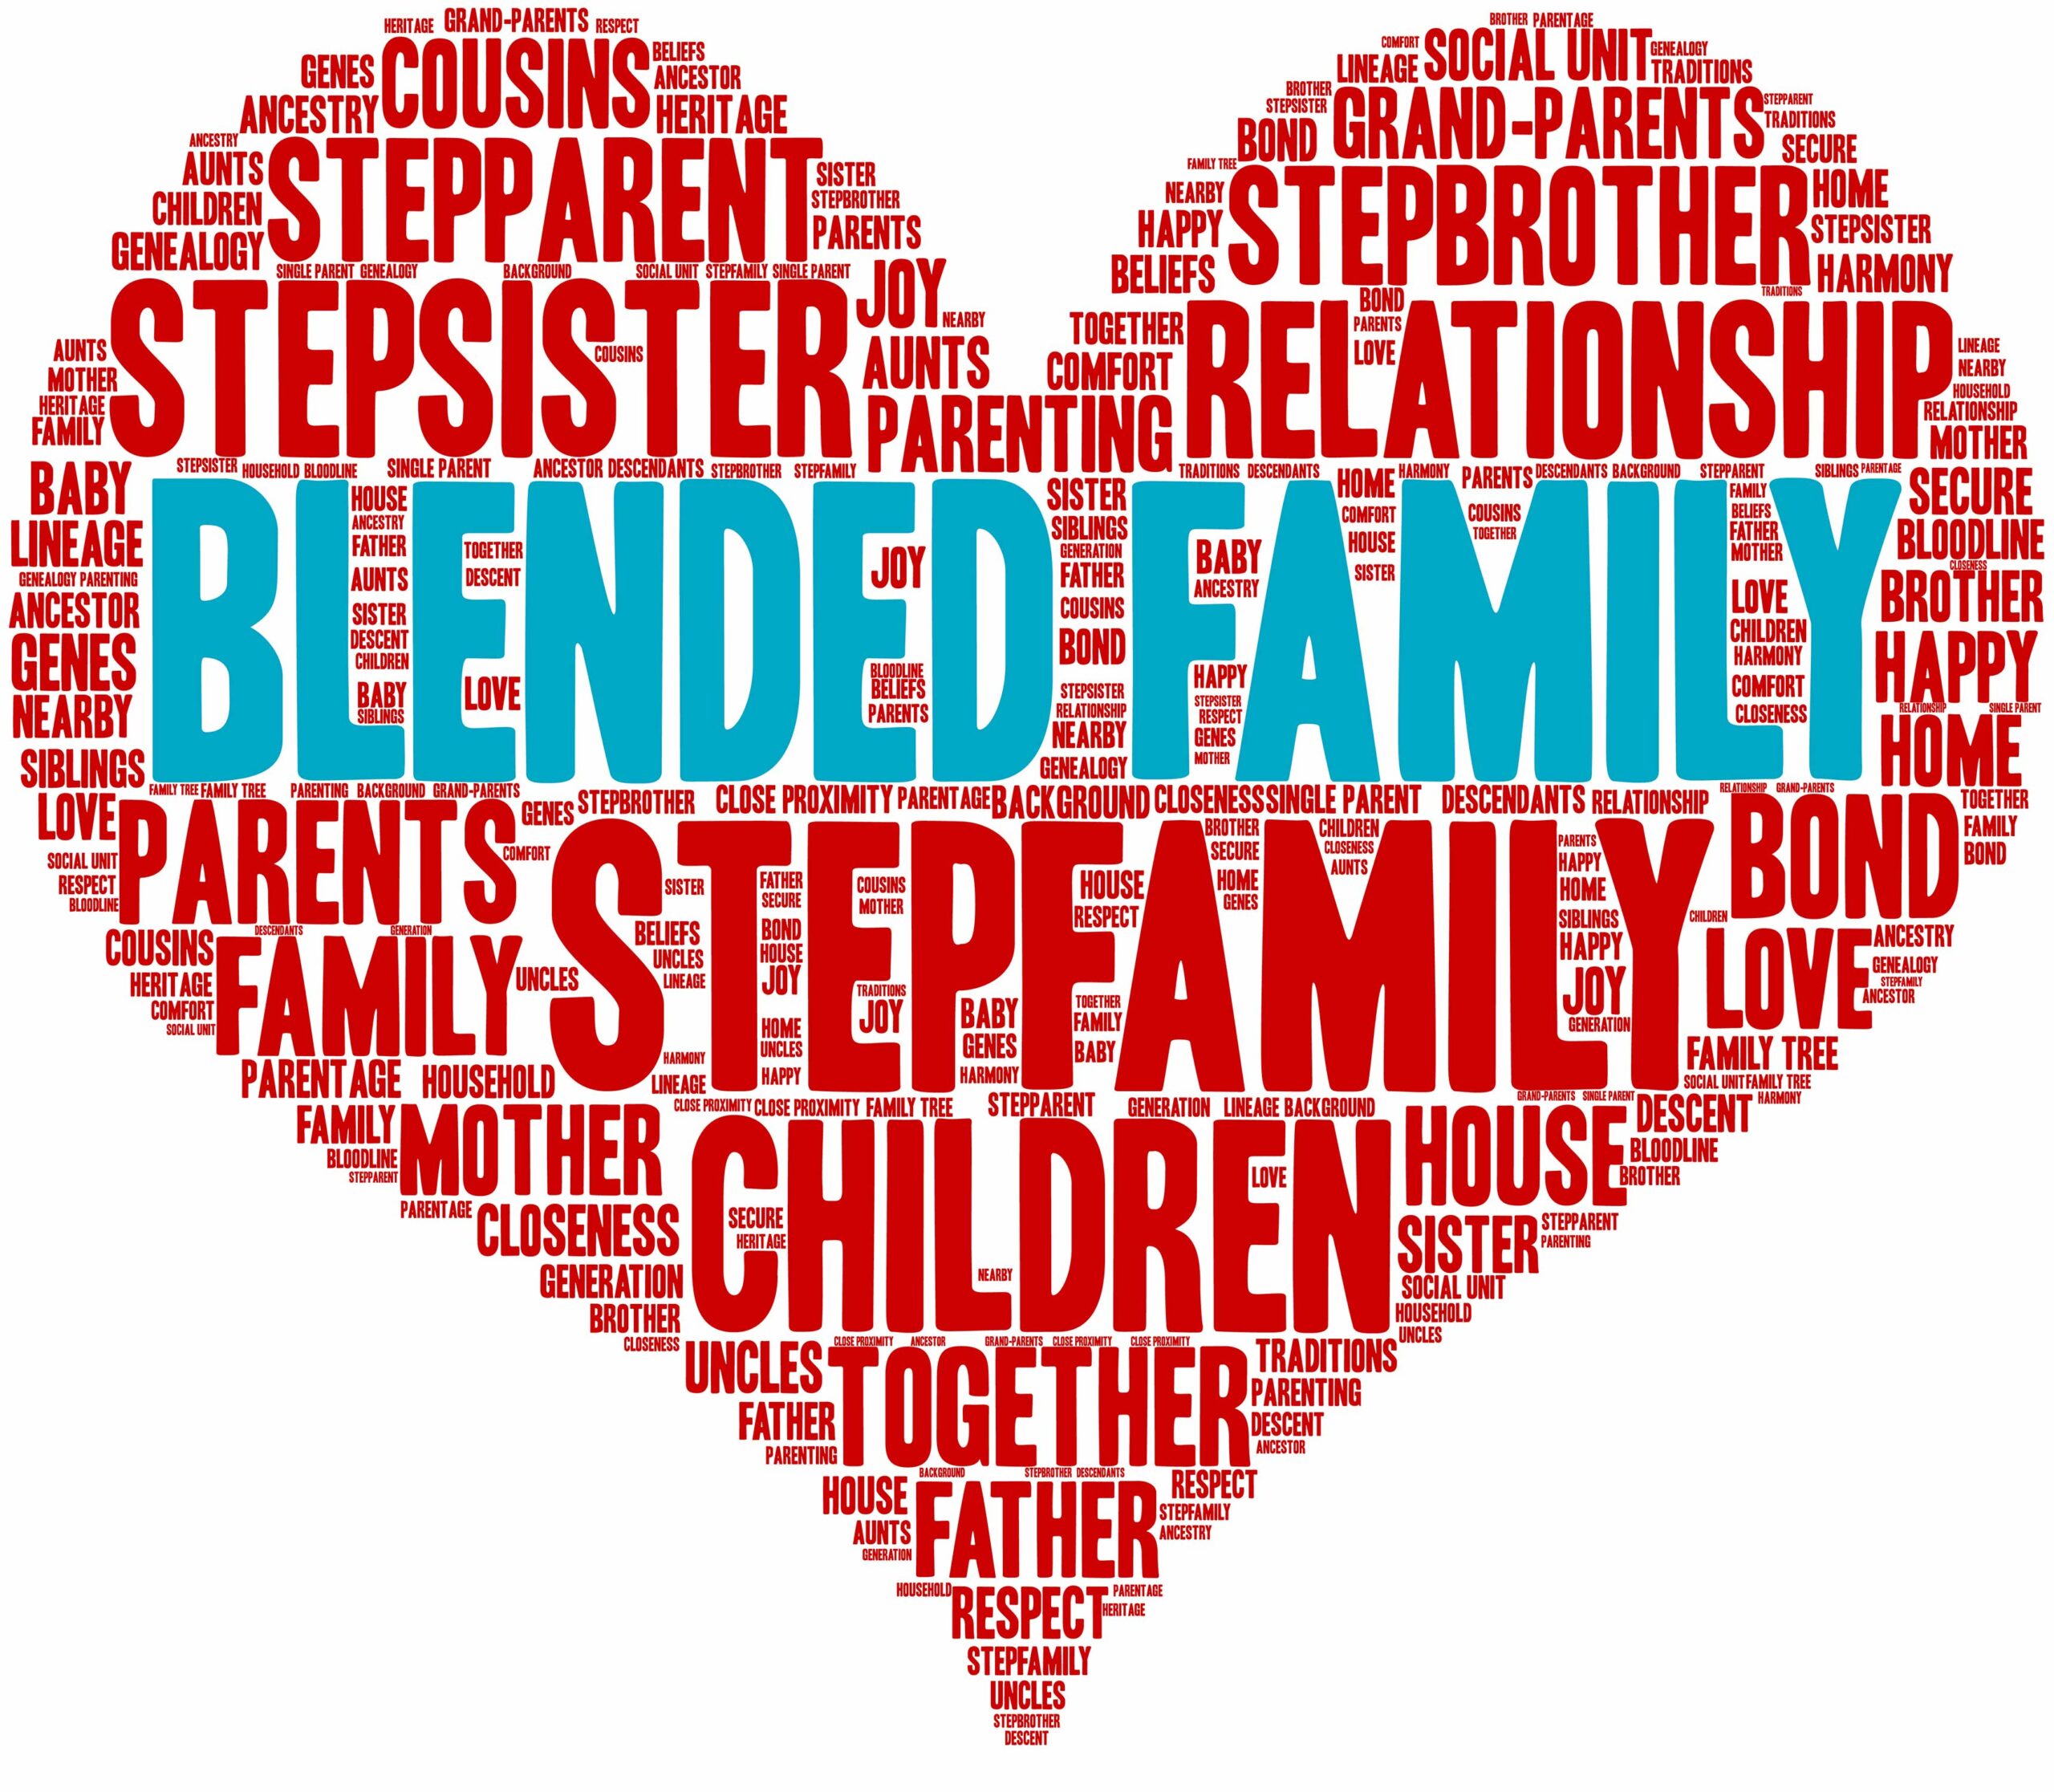 Therapist for Blended Families